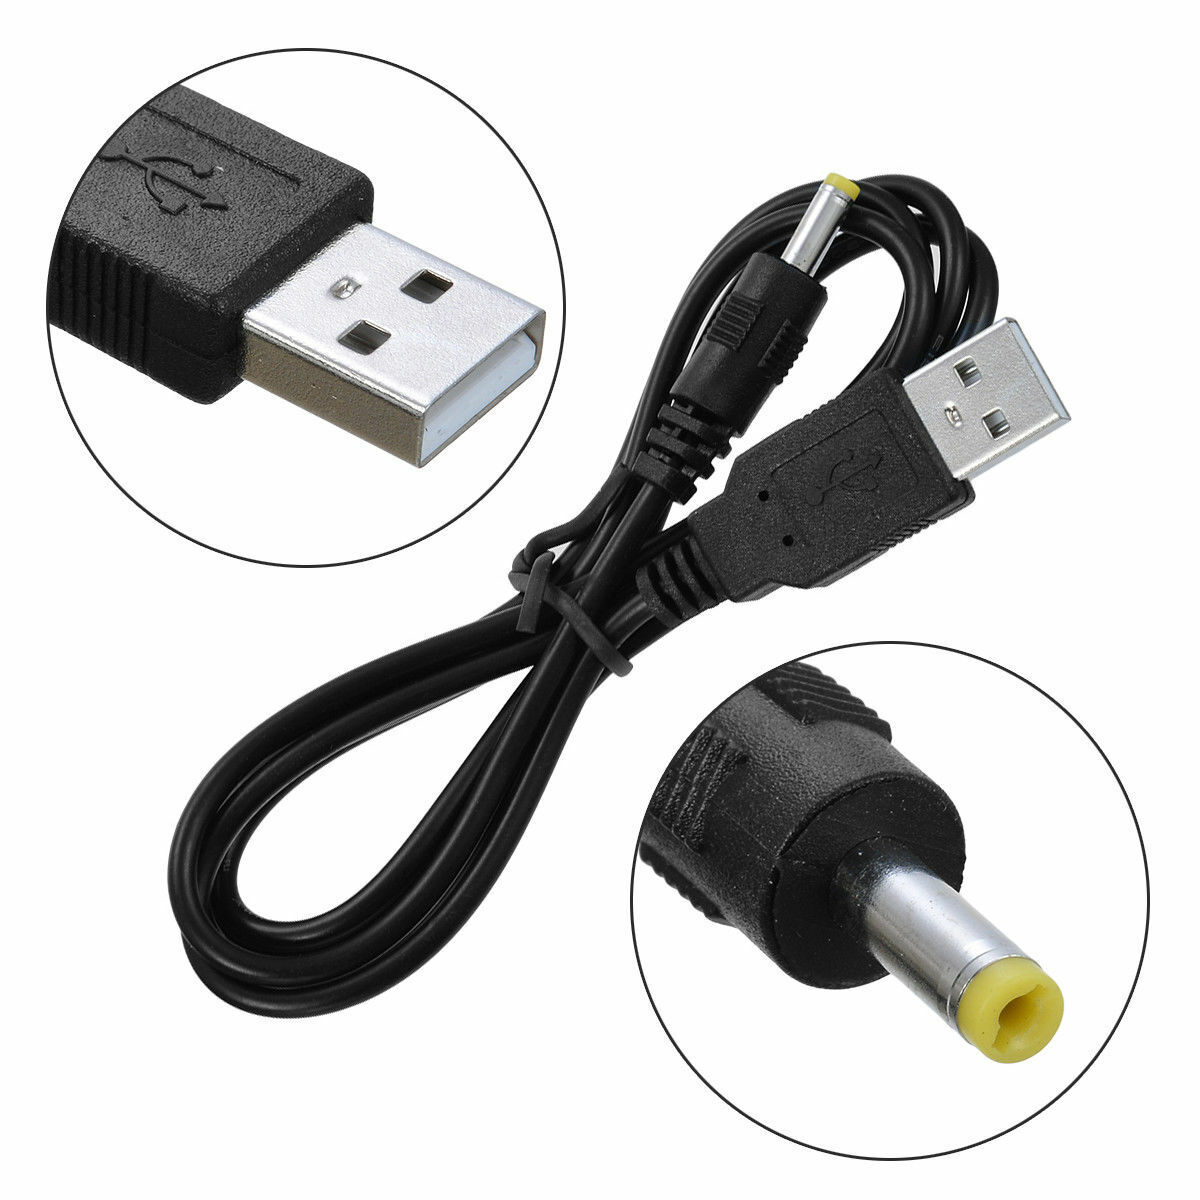 USB Charger Power Cable Cord for Sony SRS-M55 M5 A1 SRS-XB30 SRS-BTS50 Speaker Brand Unbranded/Generic Compatible Bran